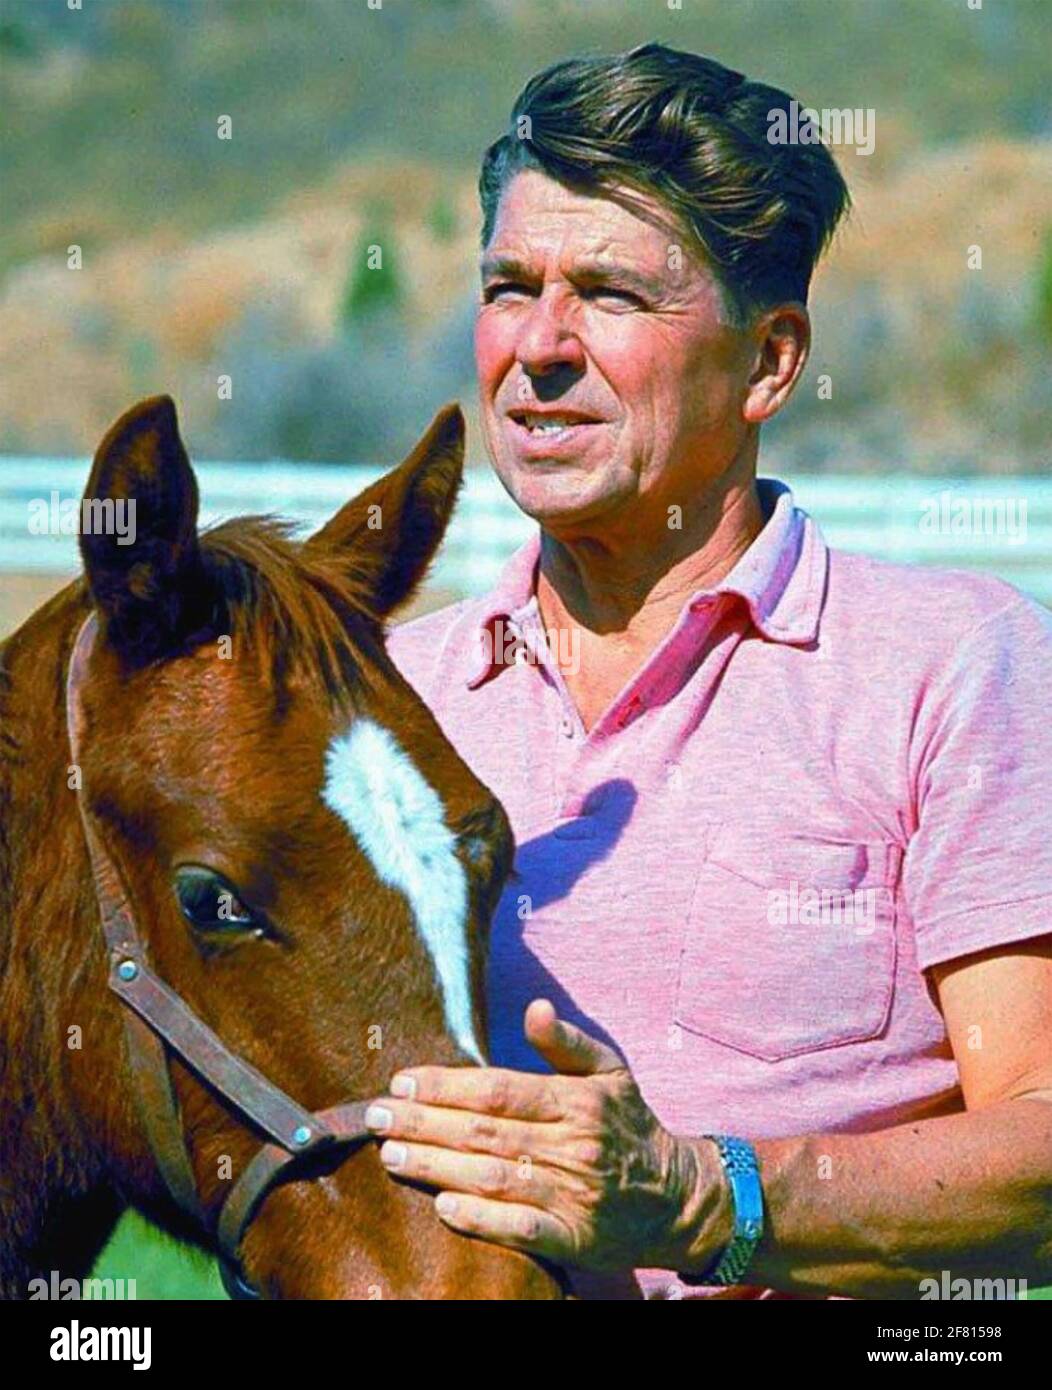 RONALD REAGAN (1911-2004) American film actor and later President, about 1965 Stock Photo